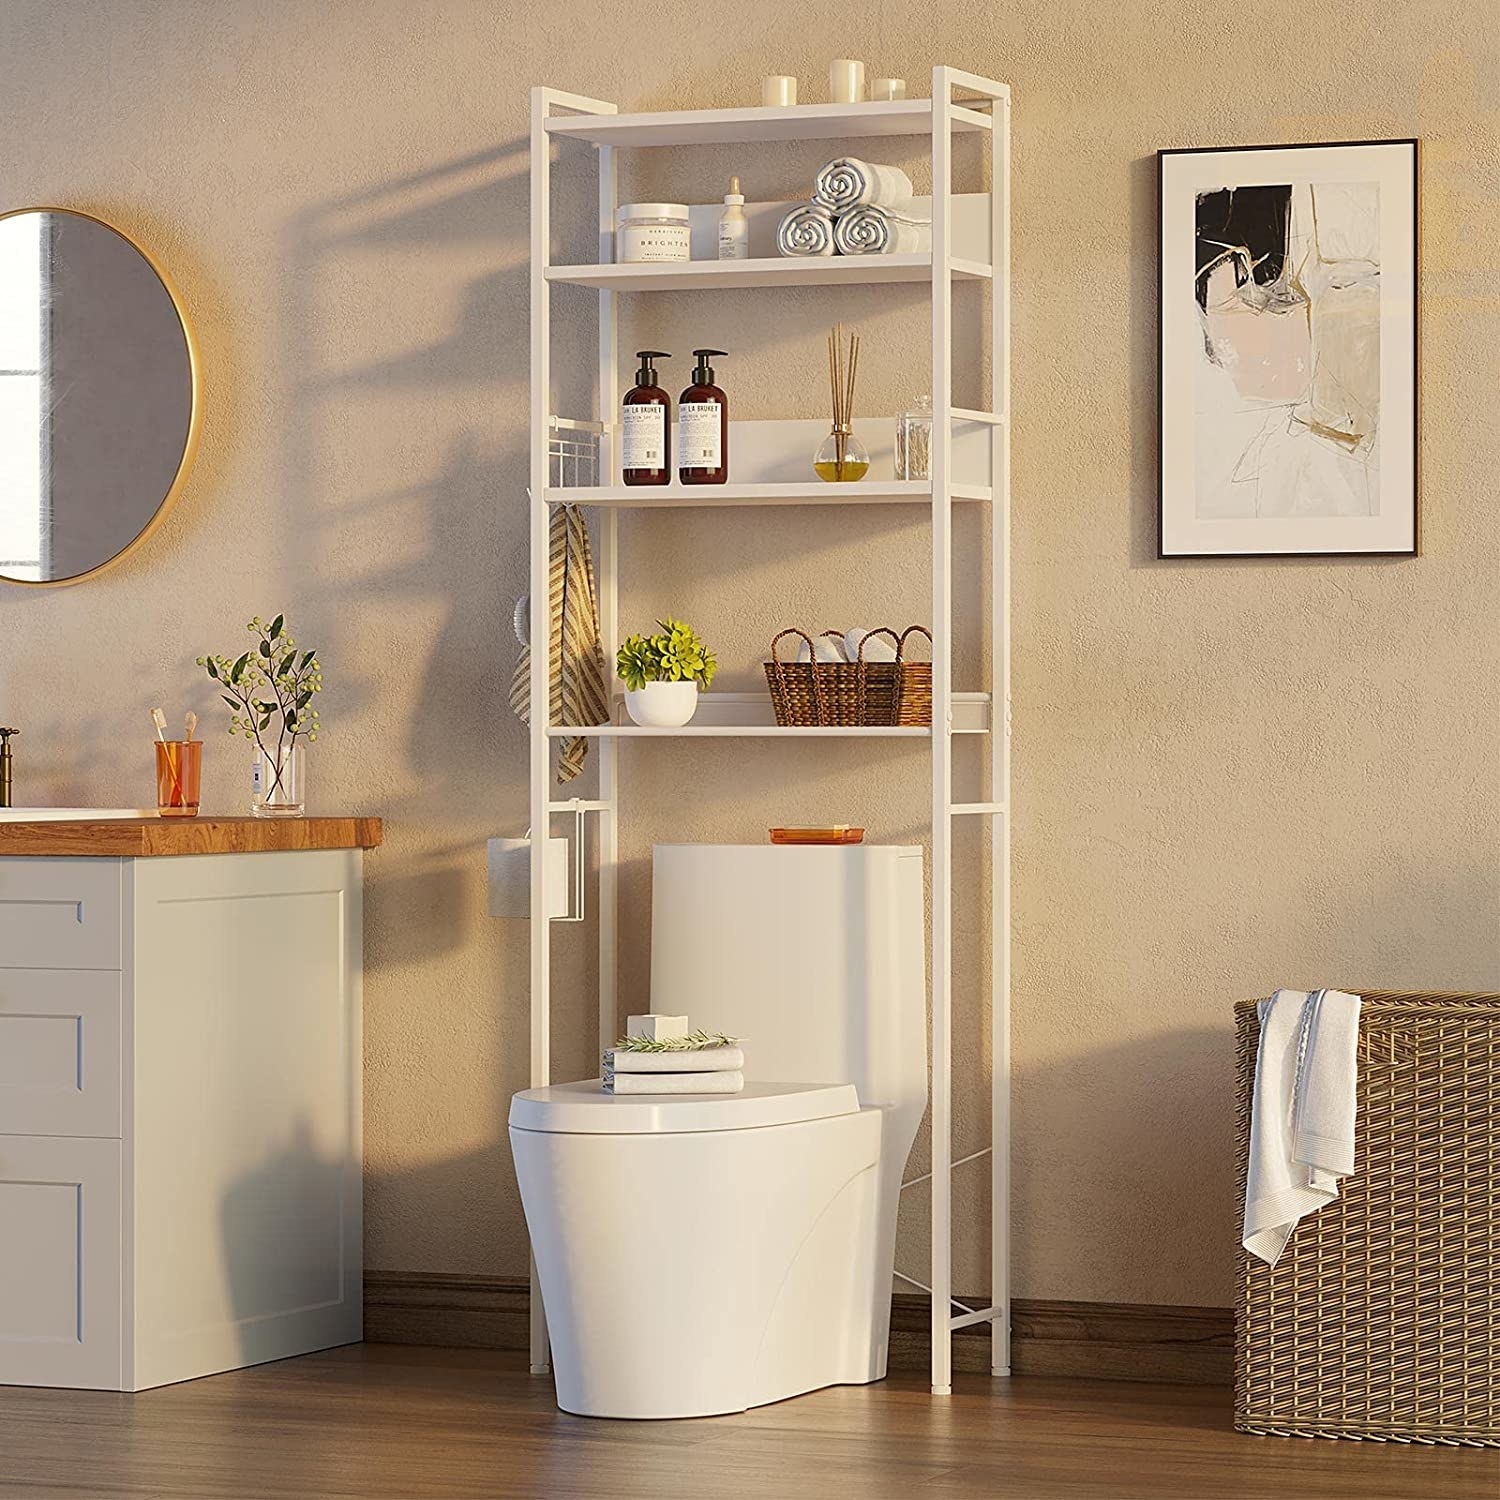 a multi-tiered shelving unit installed over a toilet